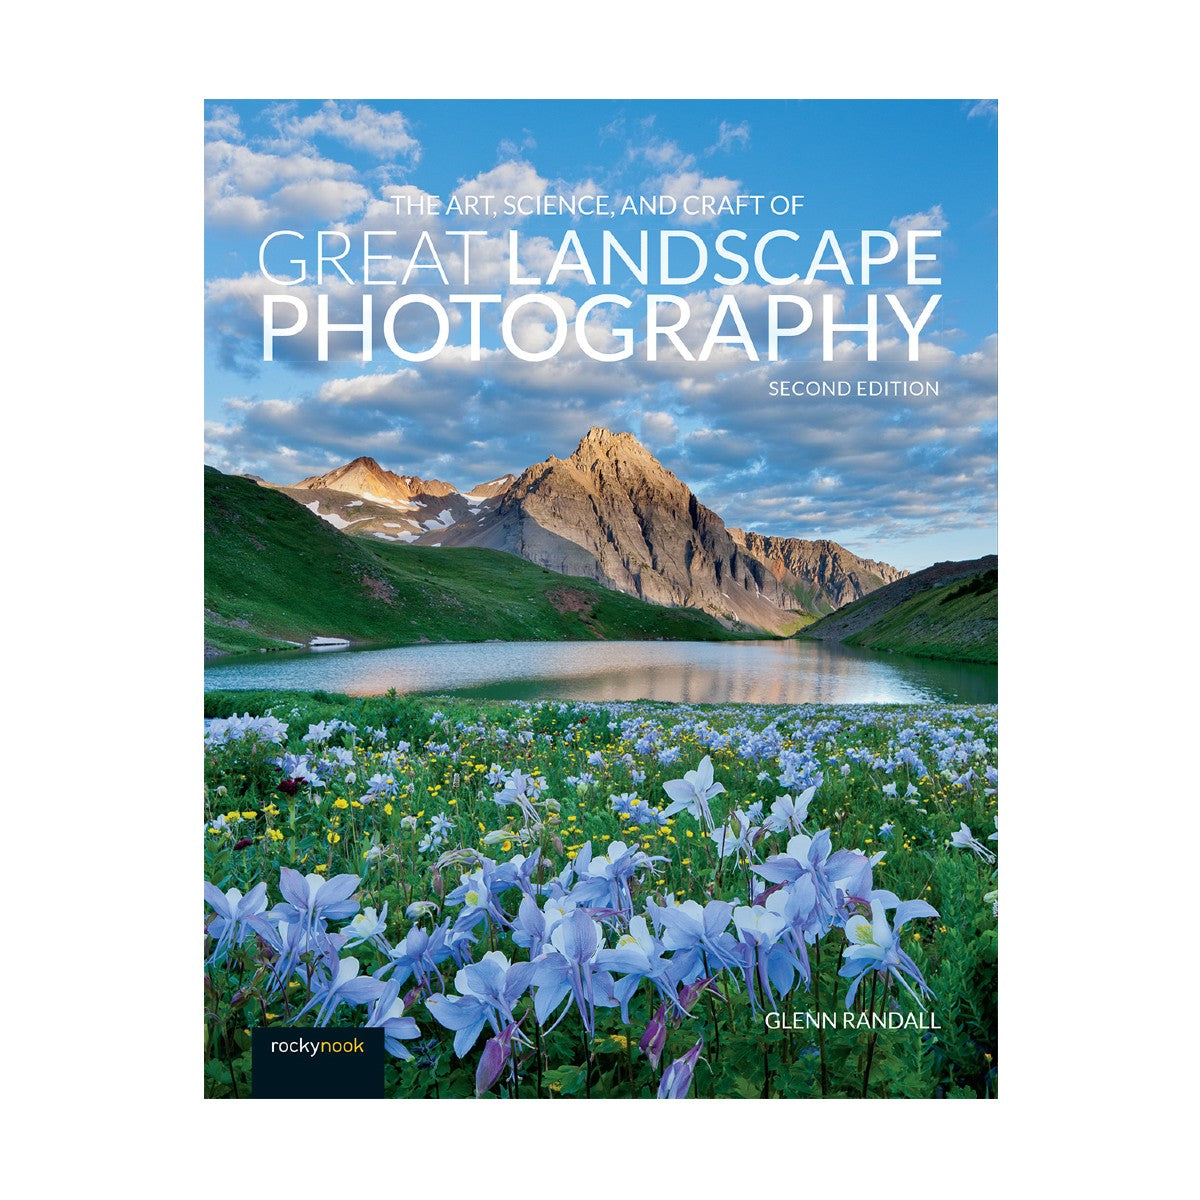 The Art, Science, and Craft of Great Landscape Photography (2nd Edition) Book